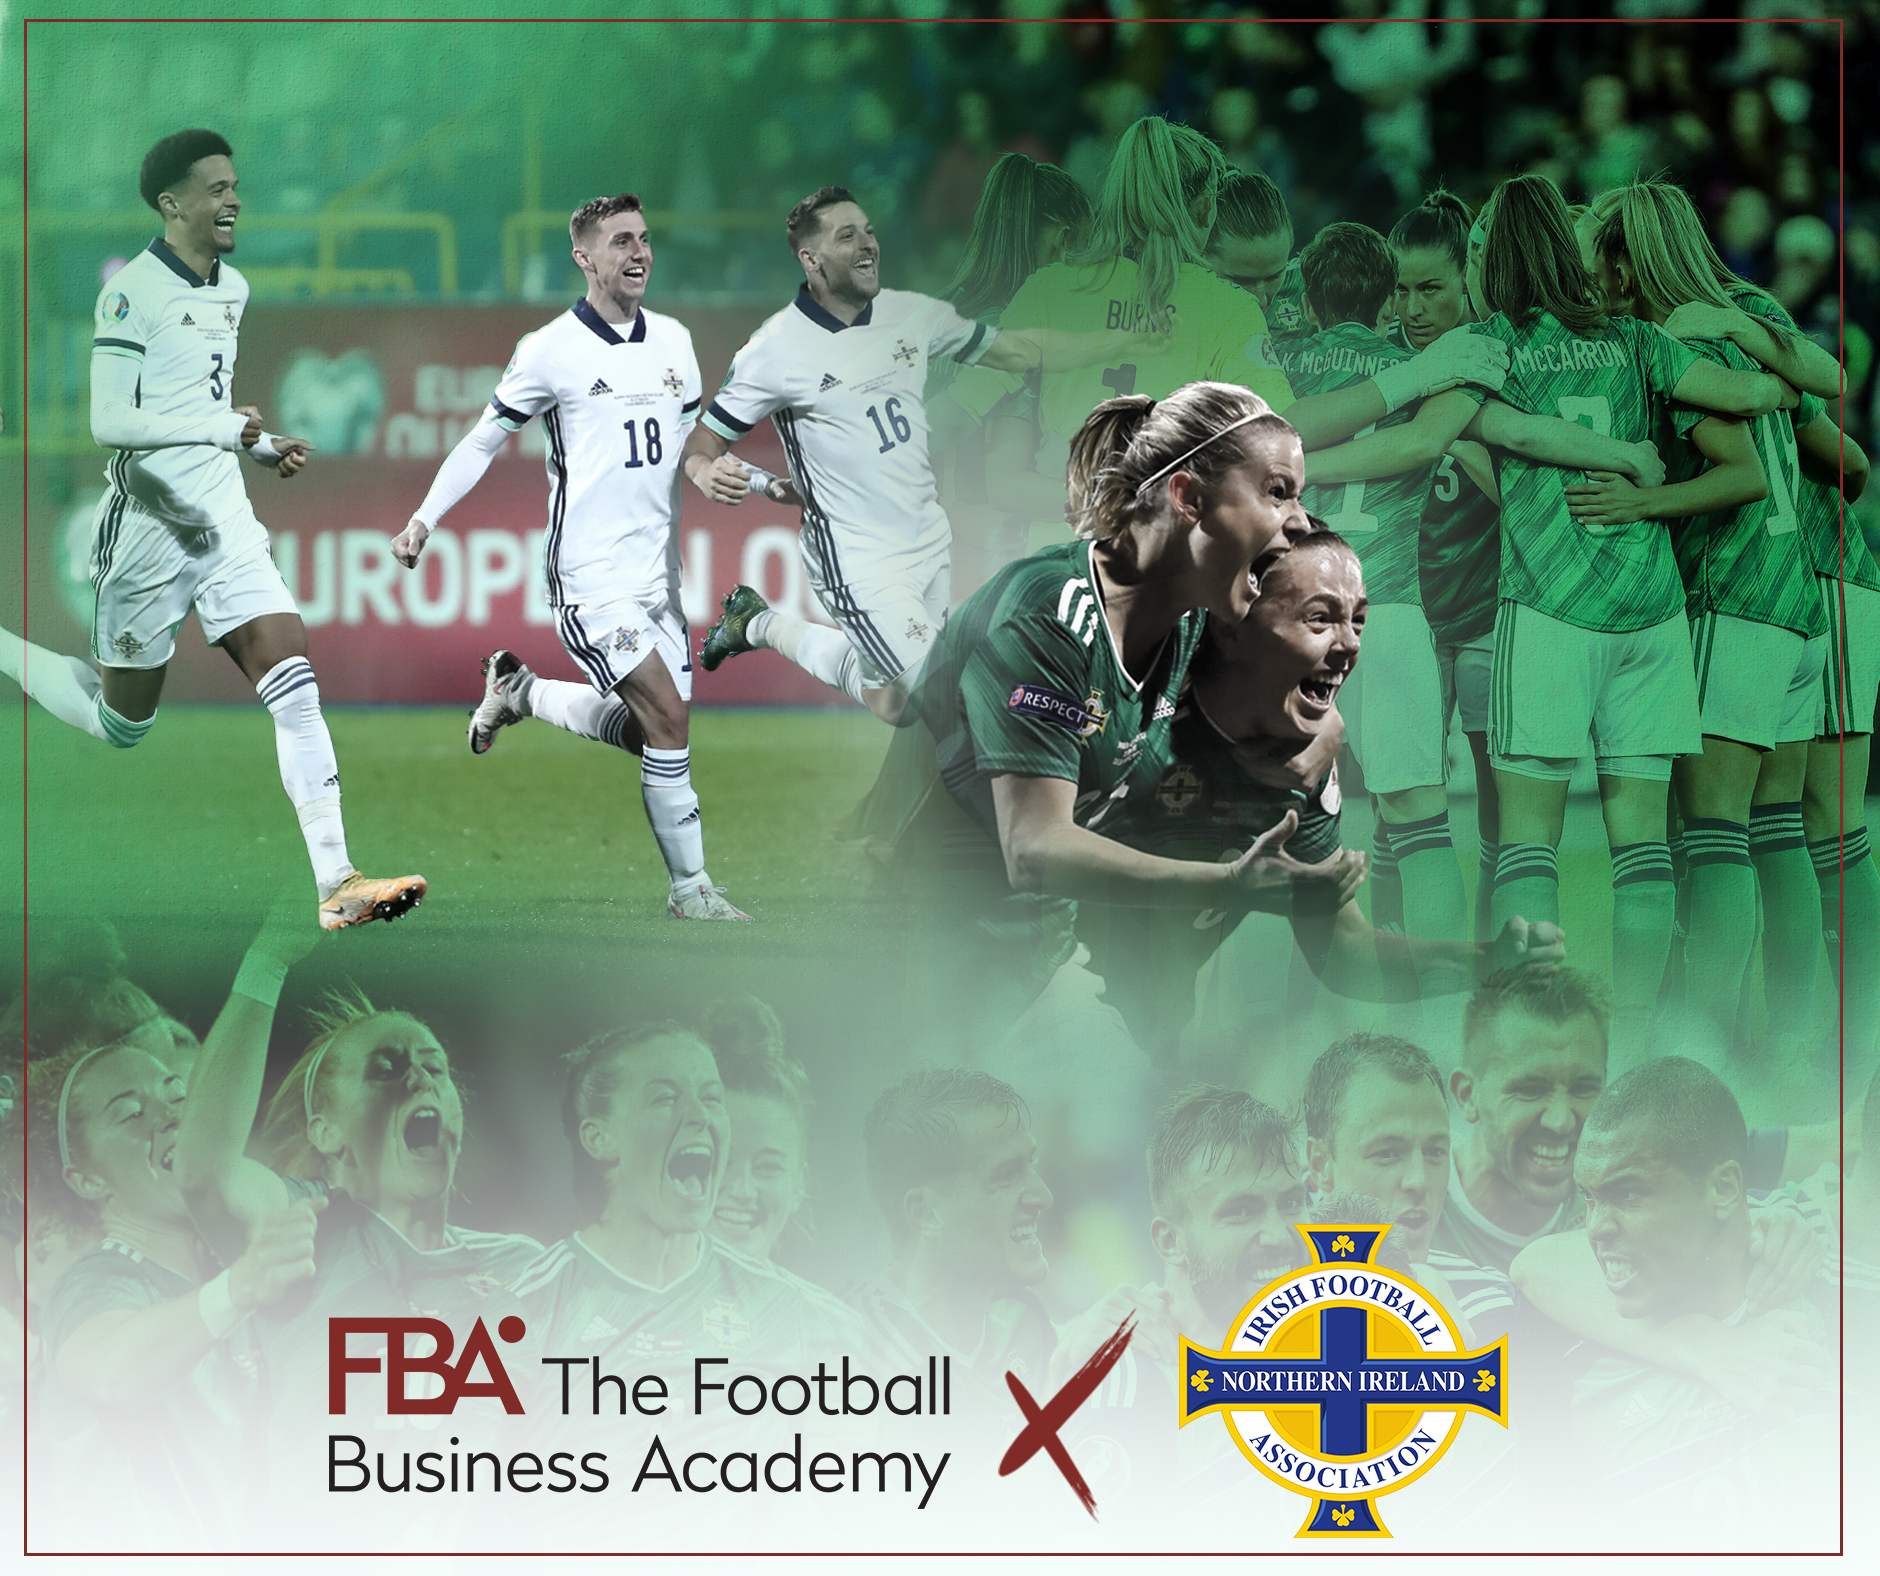 The FBA joins forces with Liga Portugal as new Educational Partner